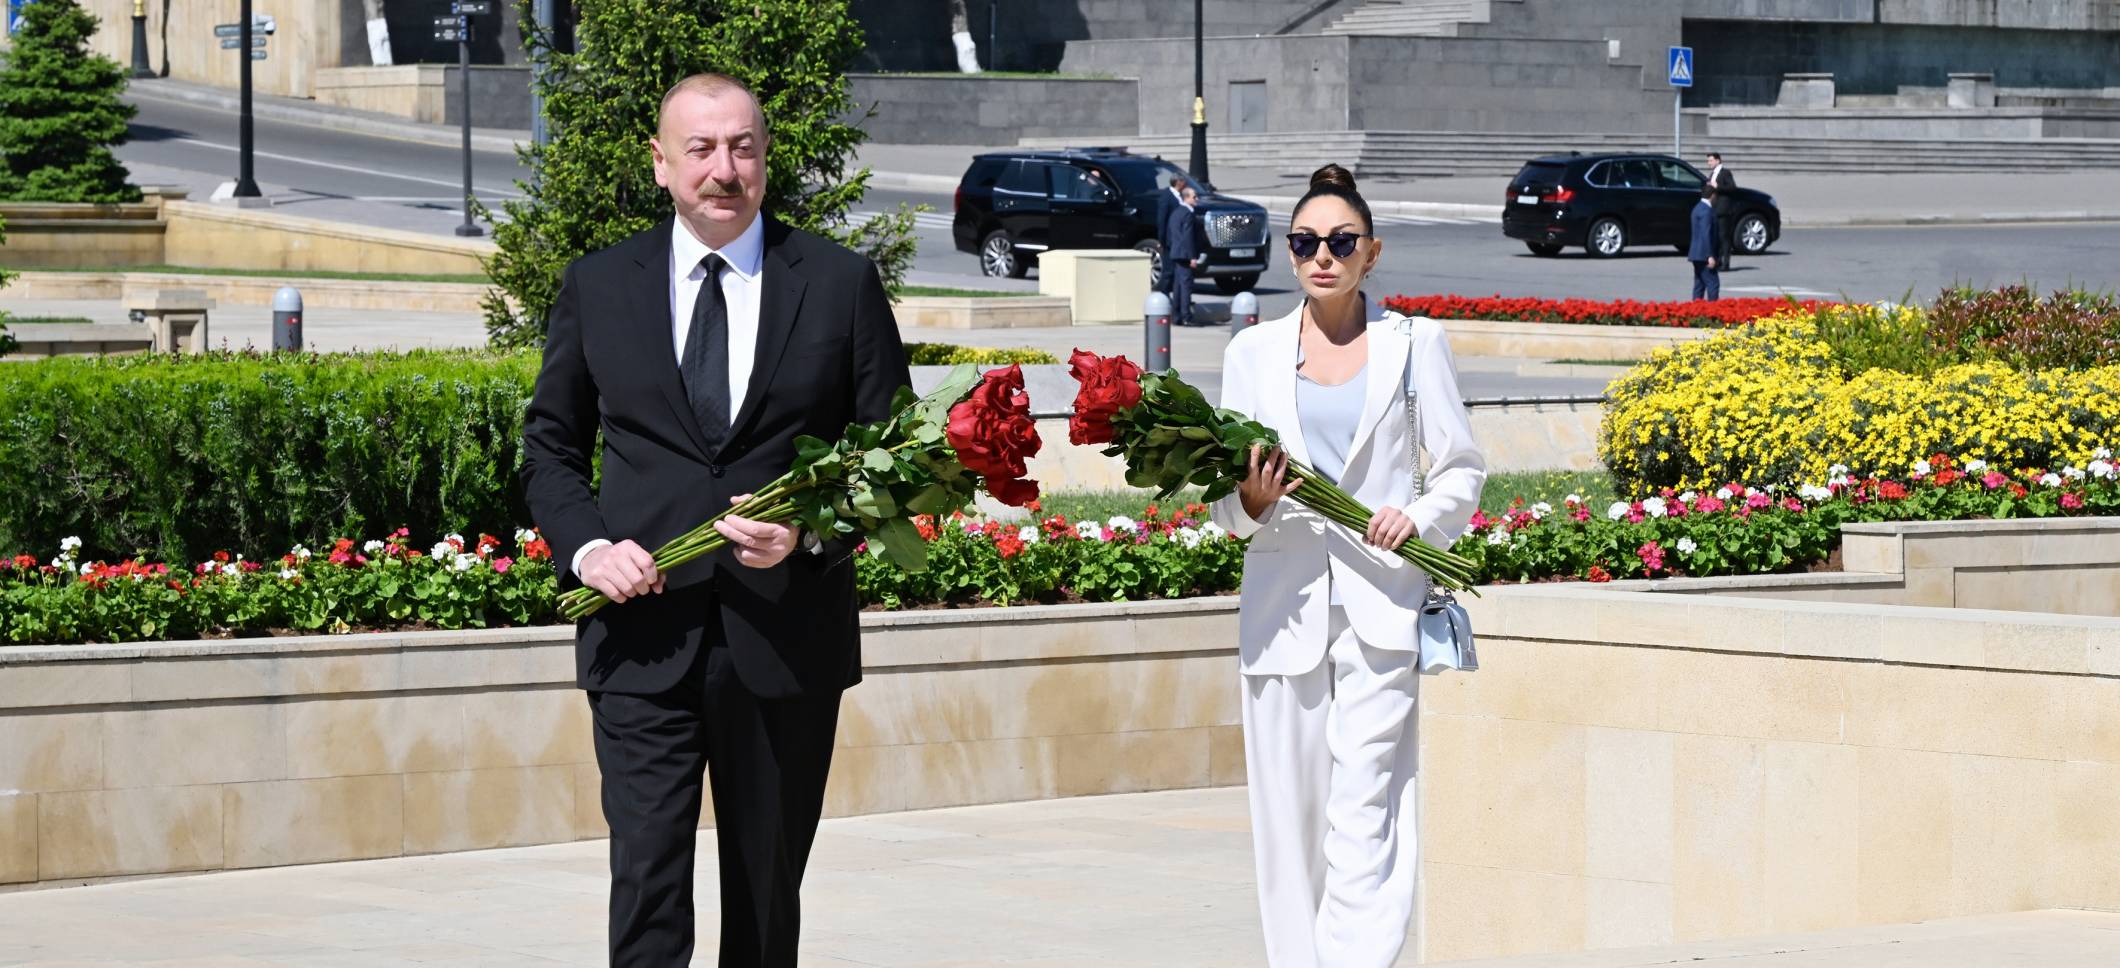 Ilham Aliyev and First Lady Mehriban Aliyeva paid tribute to Azerbaijanis who died for Victory over fascism